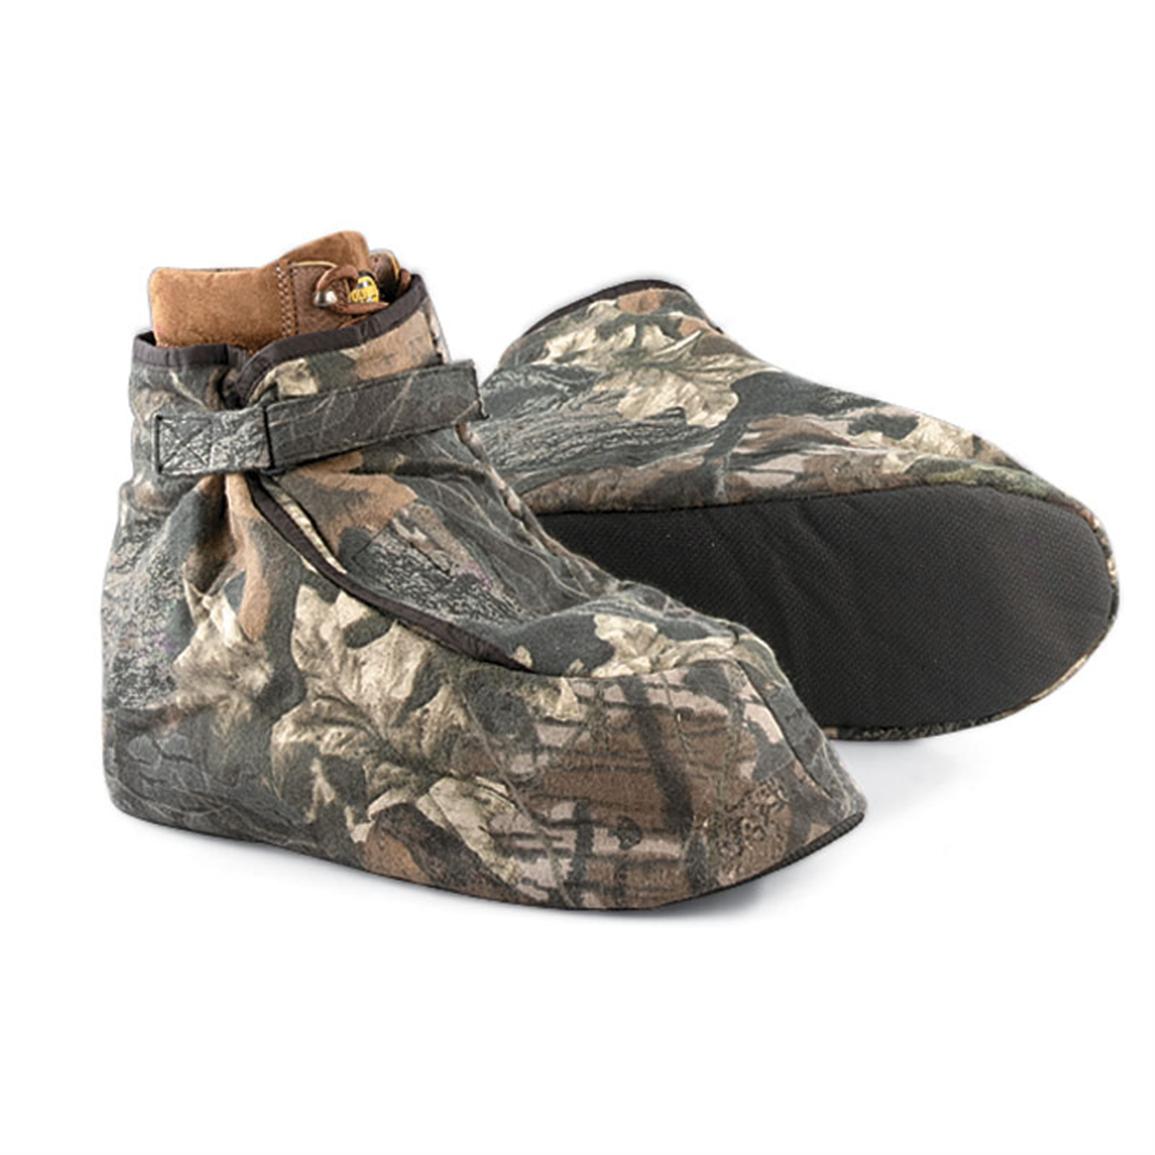 Arctic Shield Insulated Boot Covers 